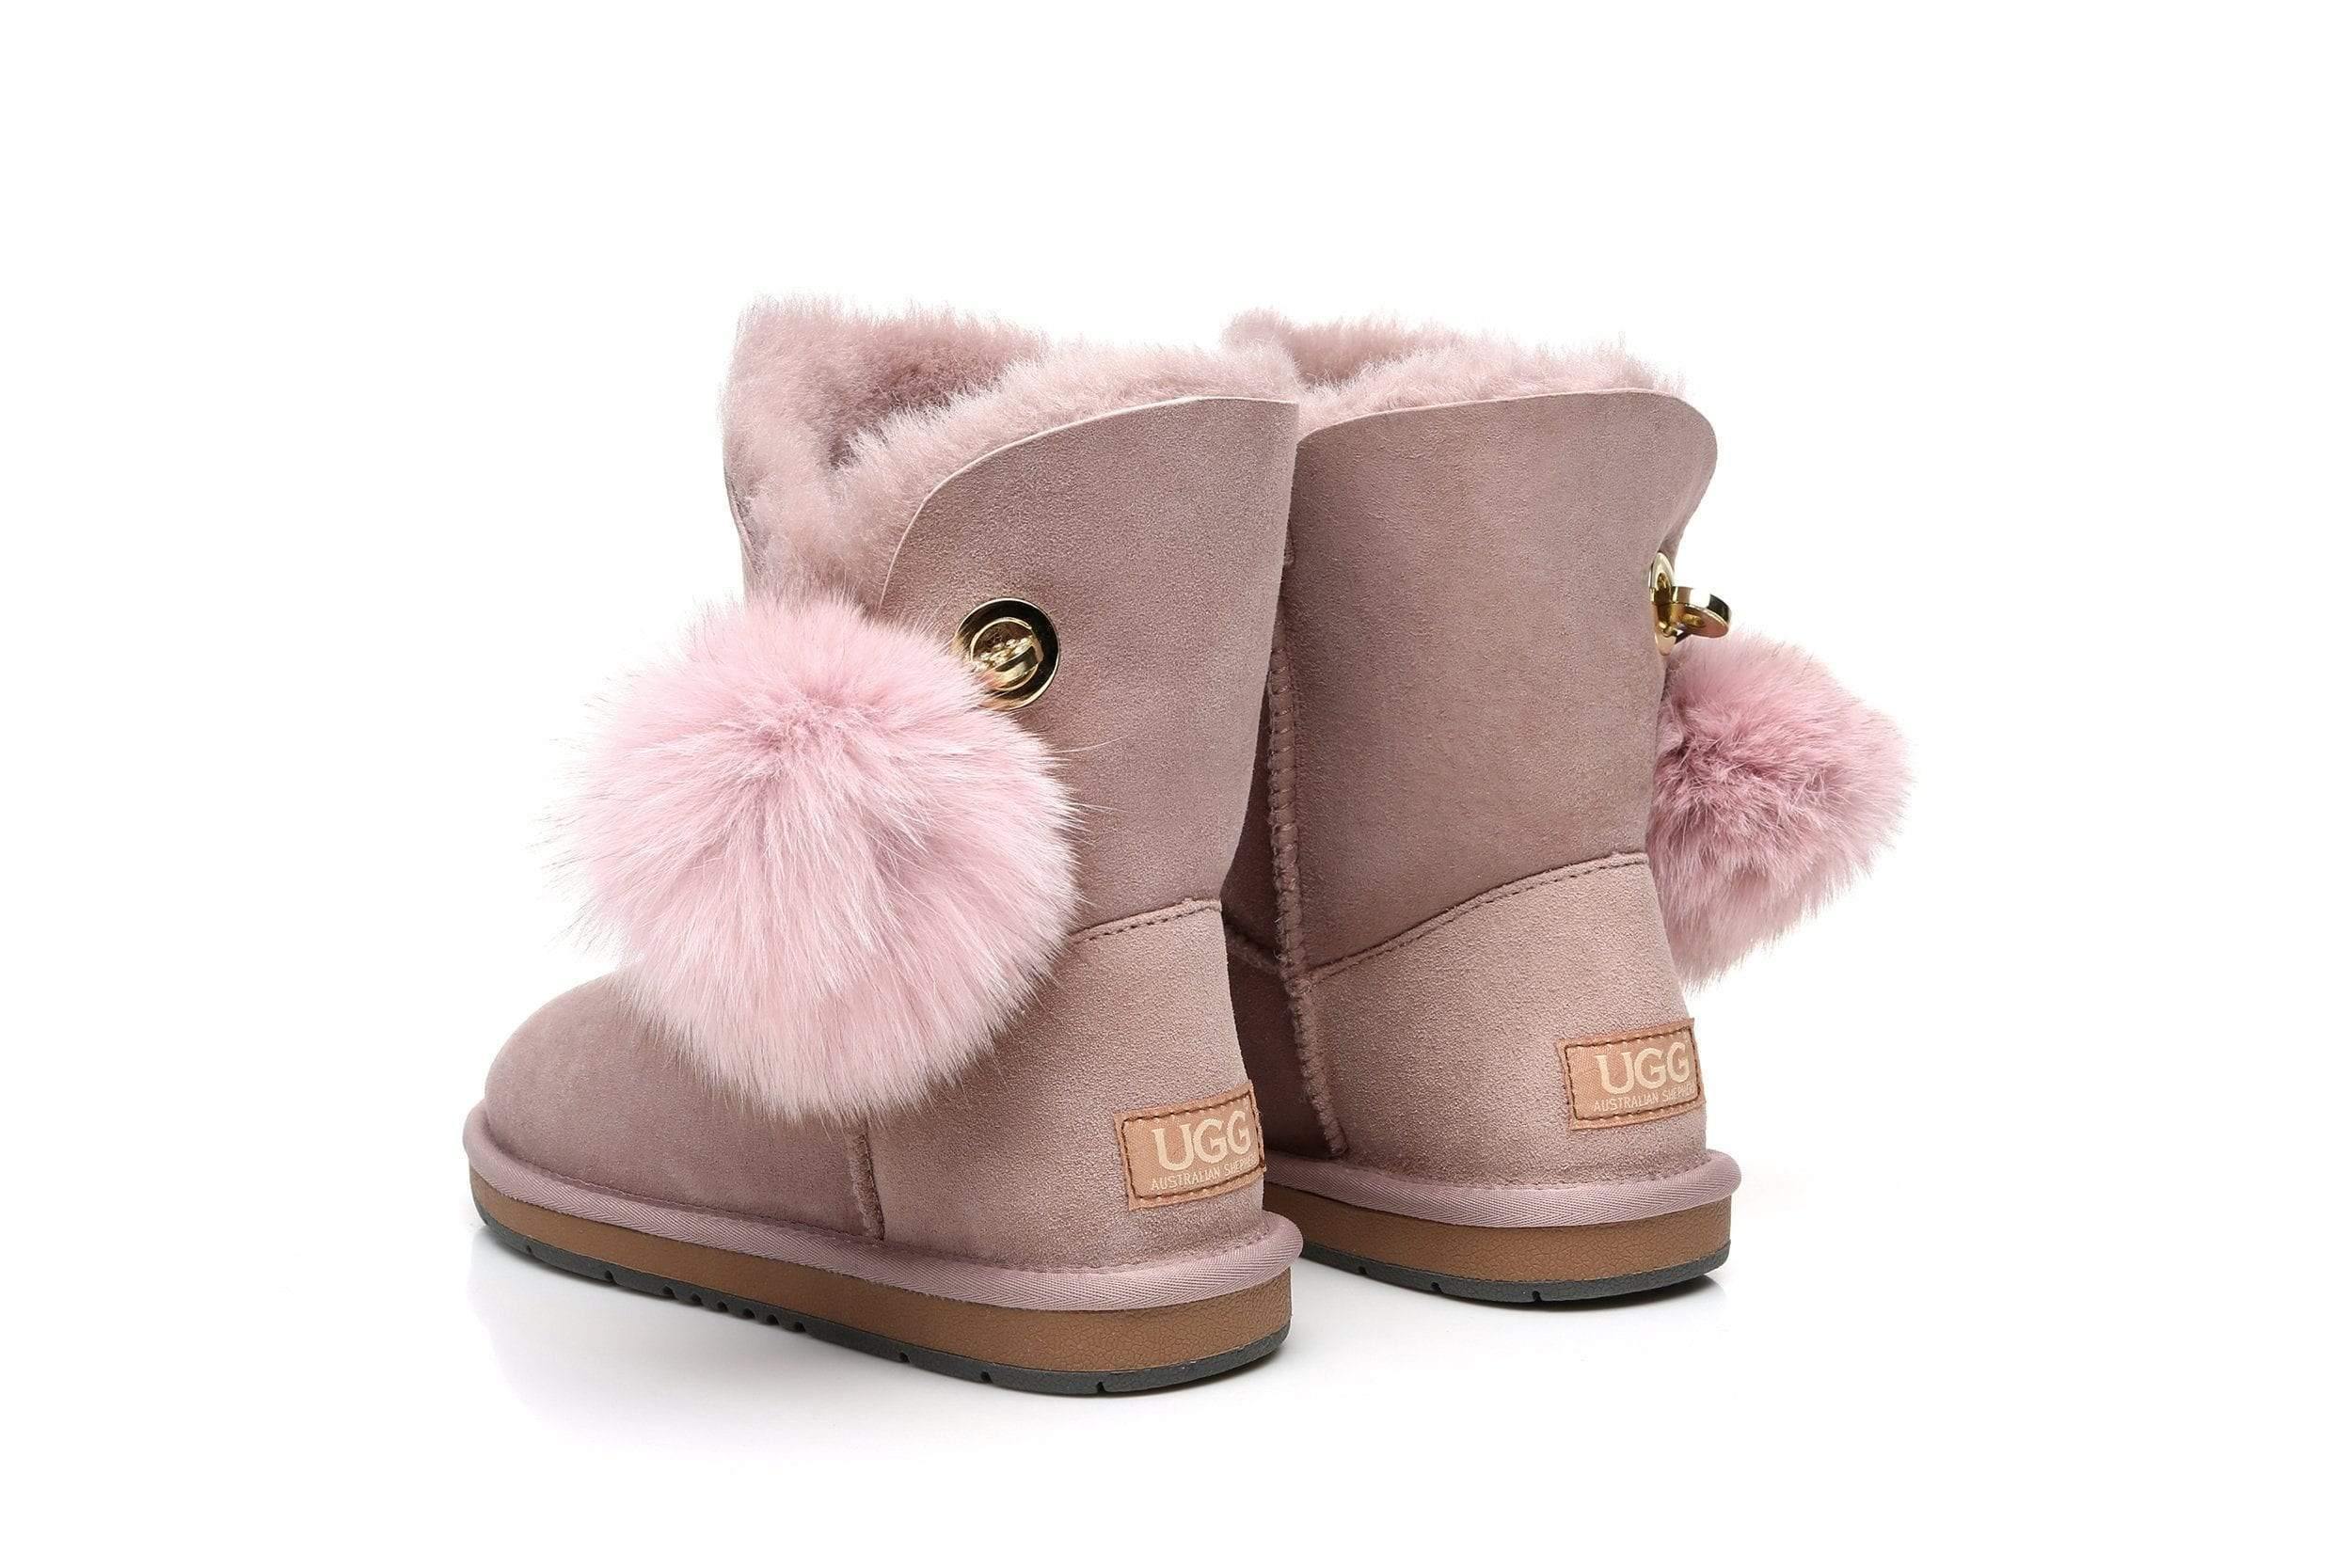 Boots - AS UGG Ladies Short Pom Pom Boots Blakely  #15663 (532849688634)